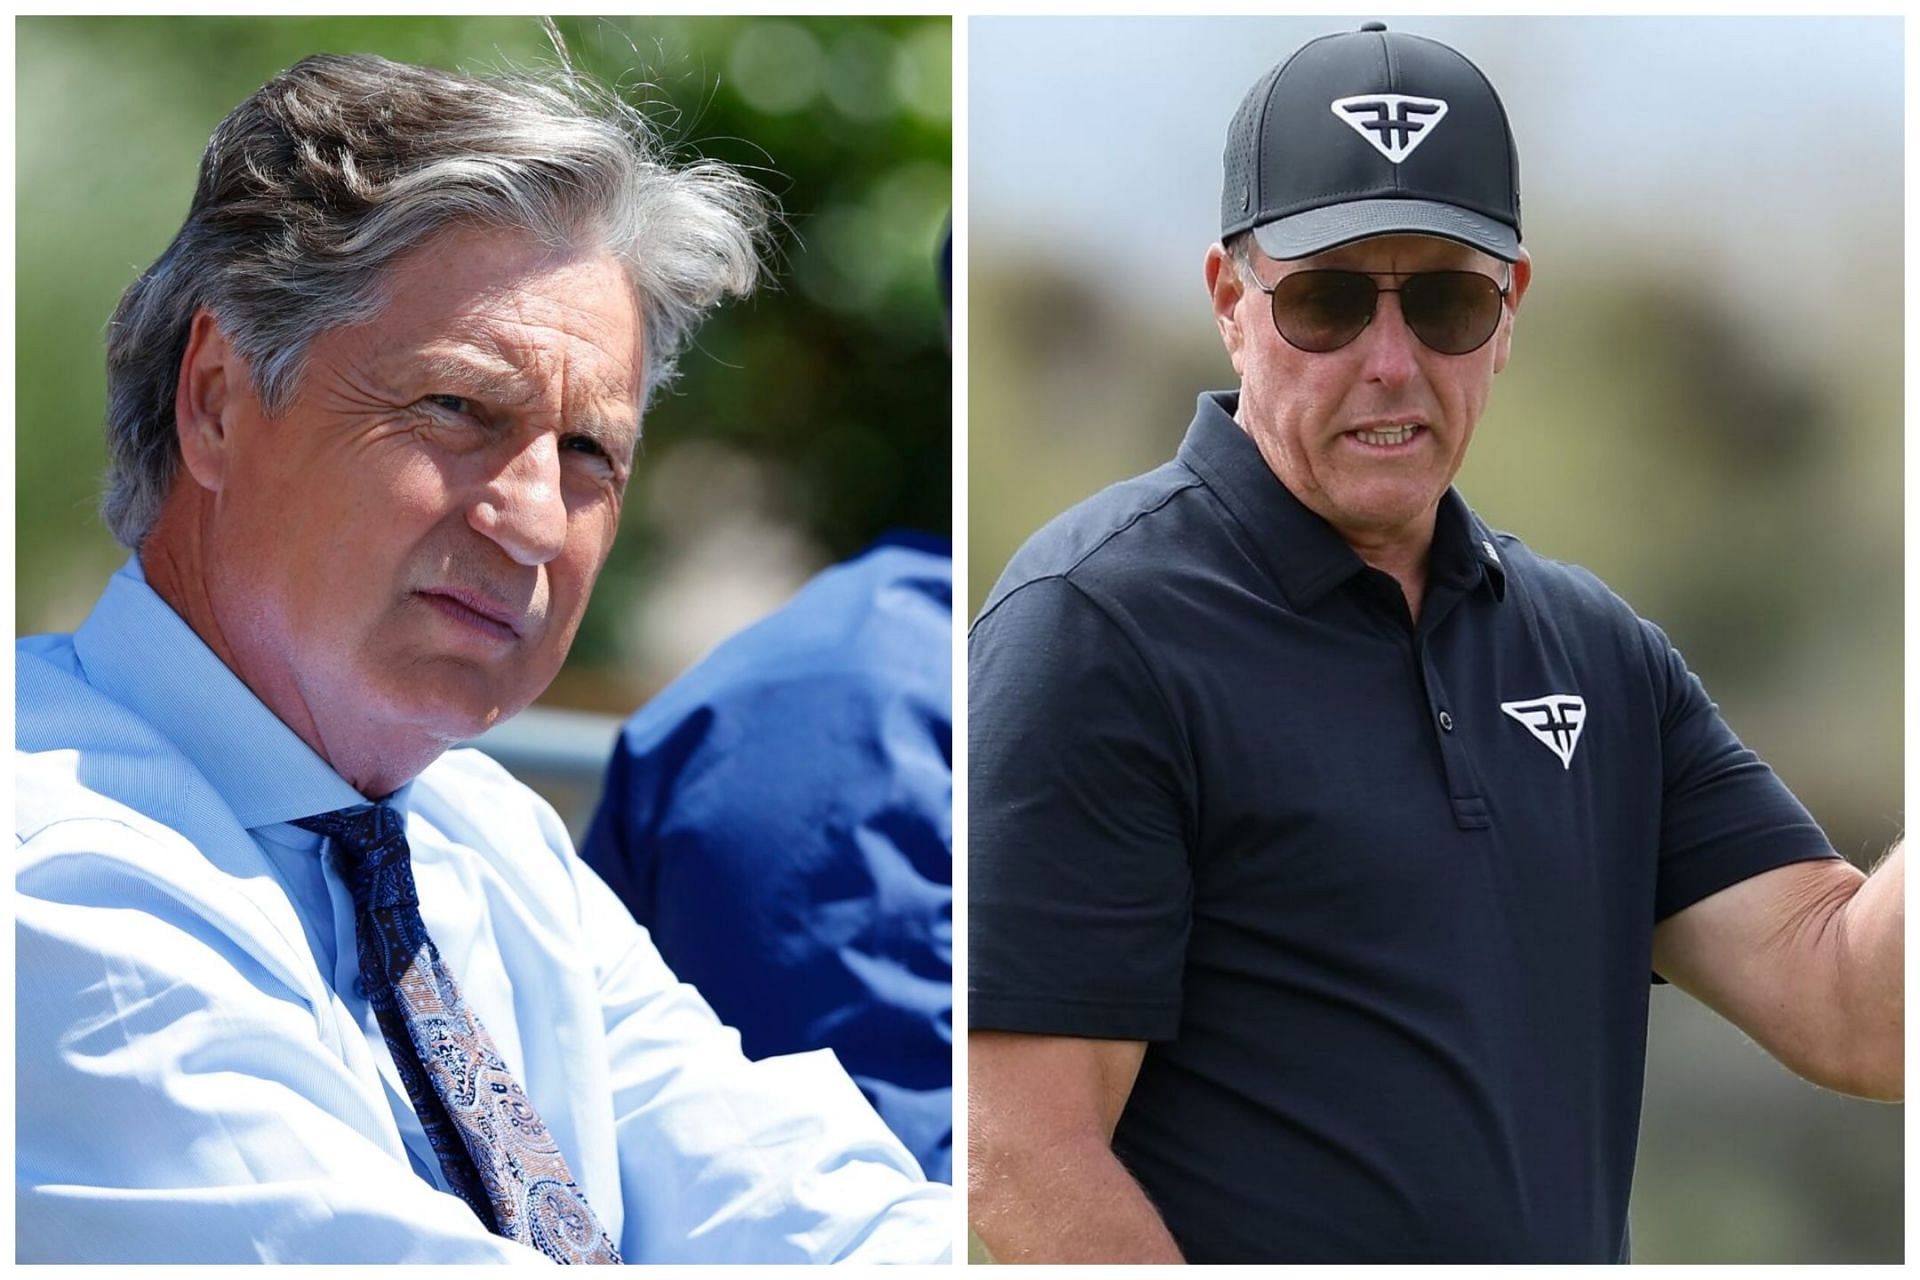 Both Brandel Chamblee and Phil Mickelson have recently been taking shots at each other on Twitter